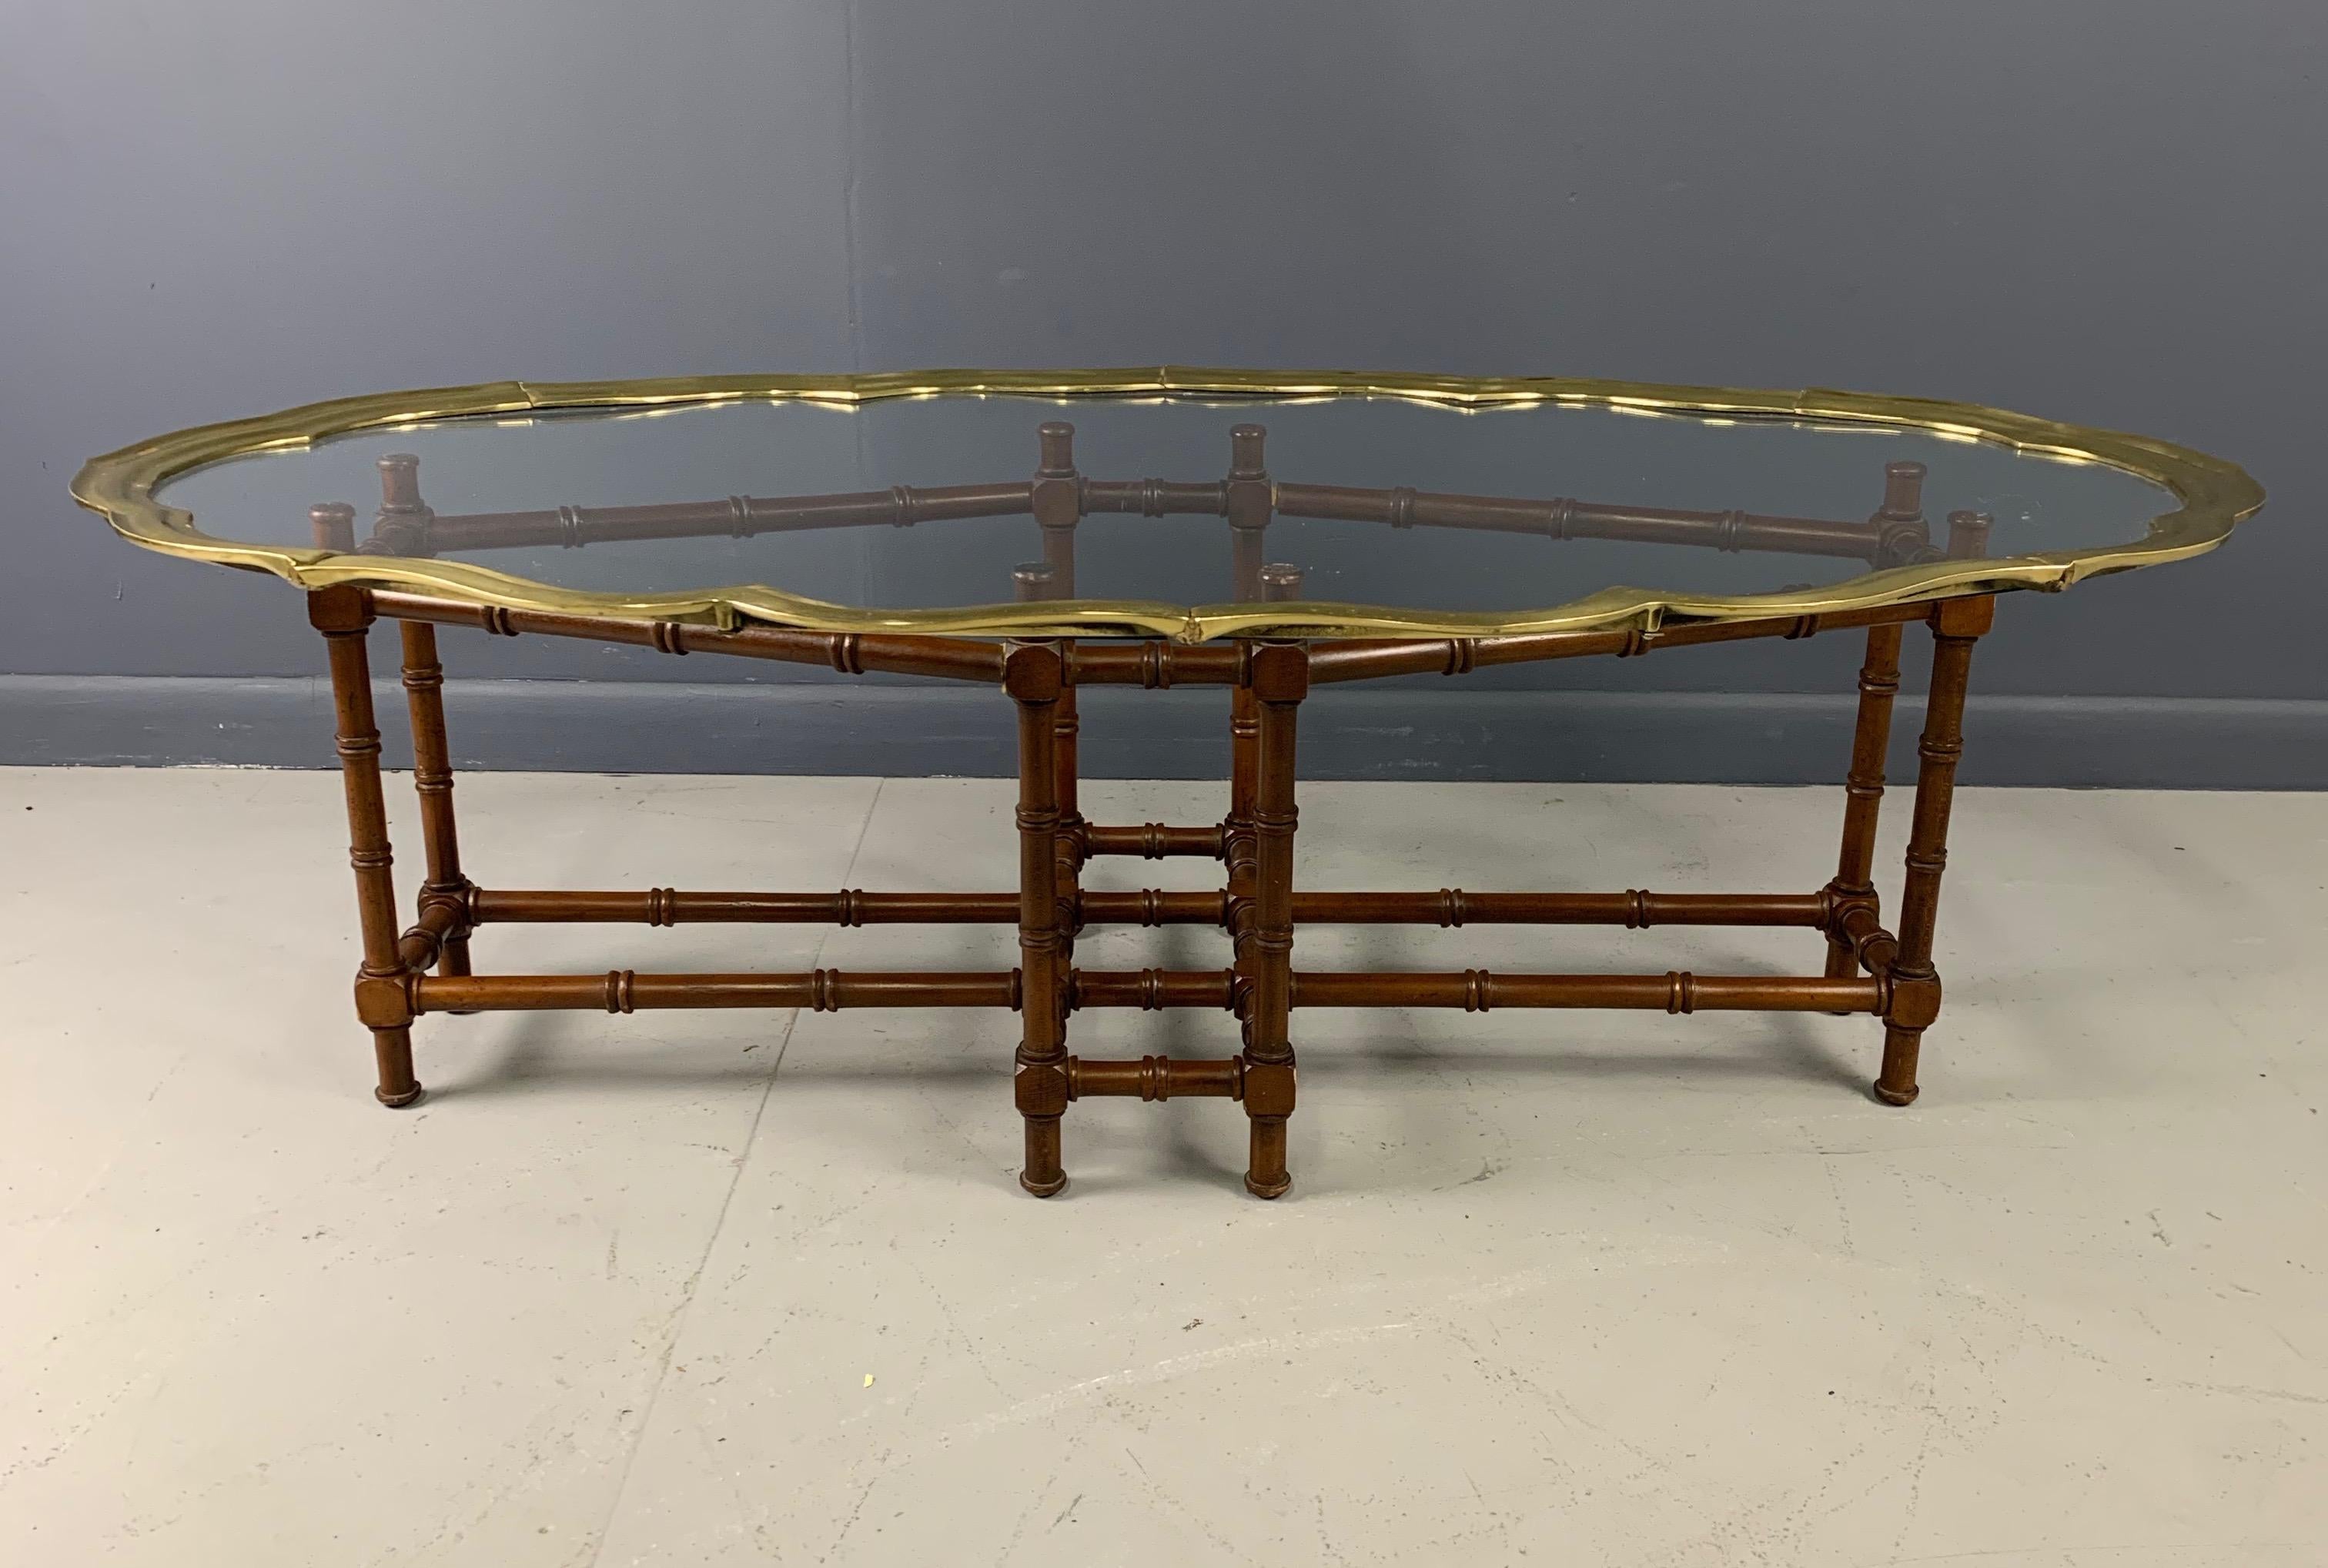 Vintage faux bamboo coffee/cocktail table features metal frame and glass tray top rimmed in solid brass. Good vintage condition with minor imperfections consistent with age.